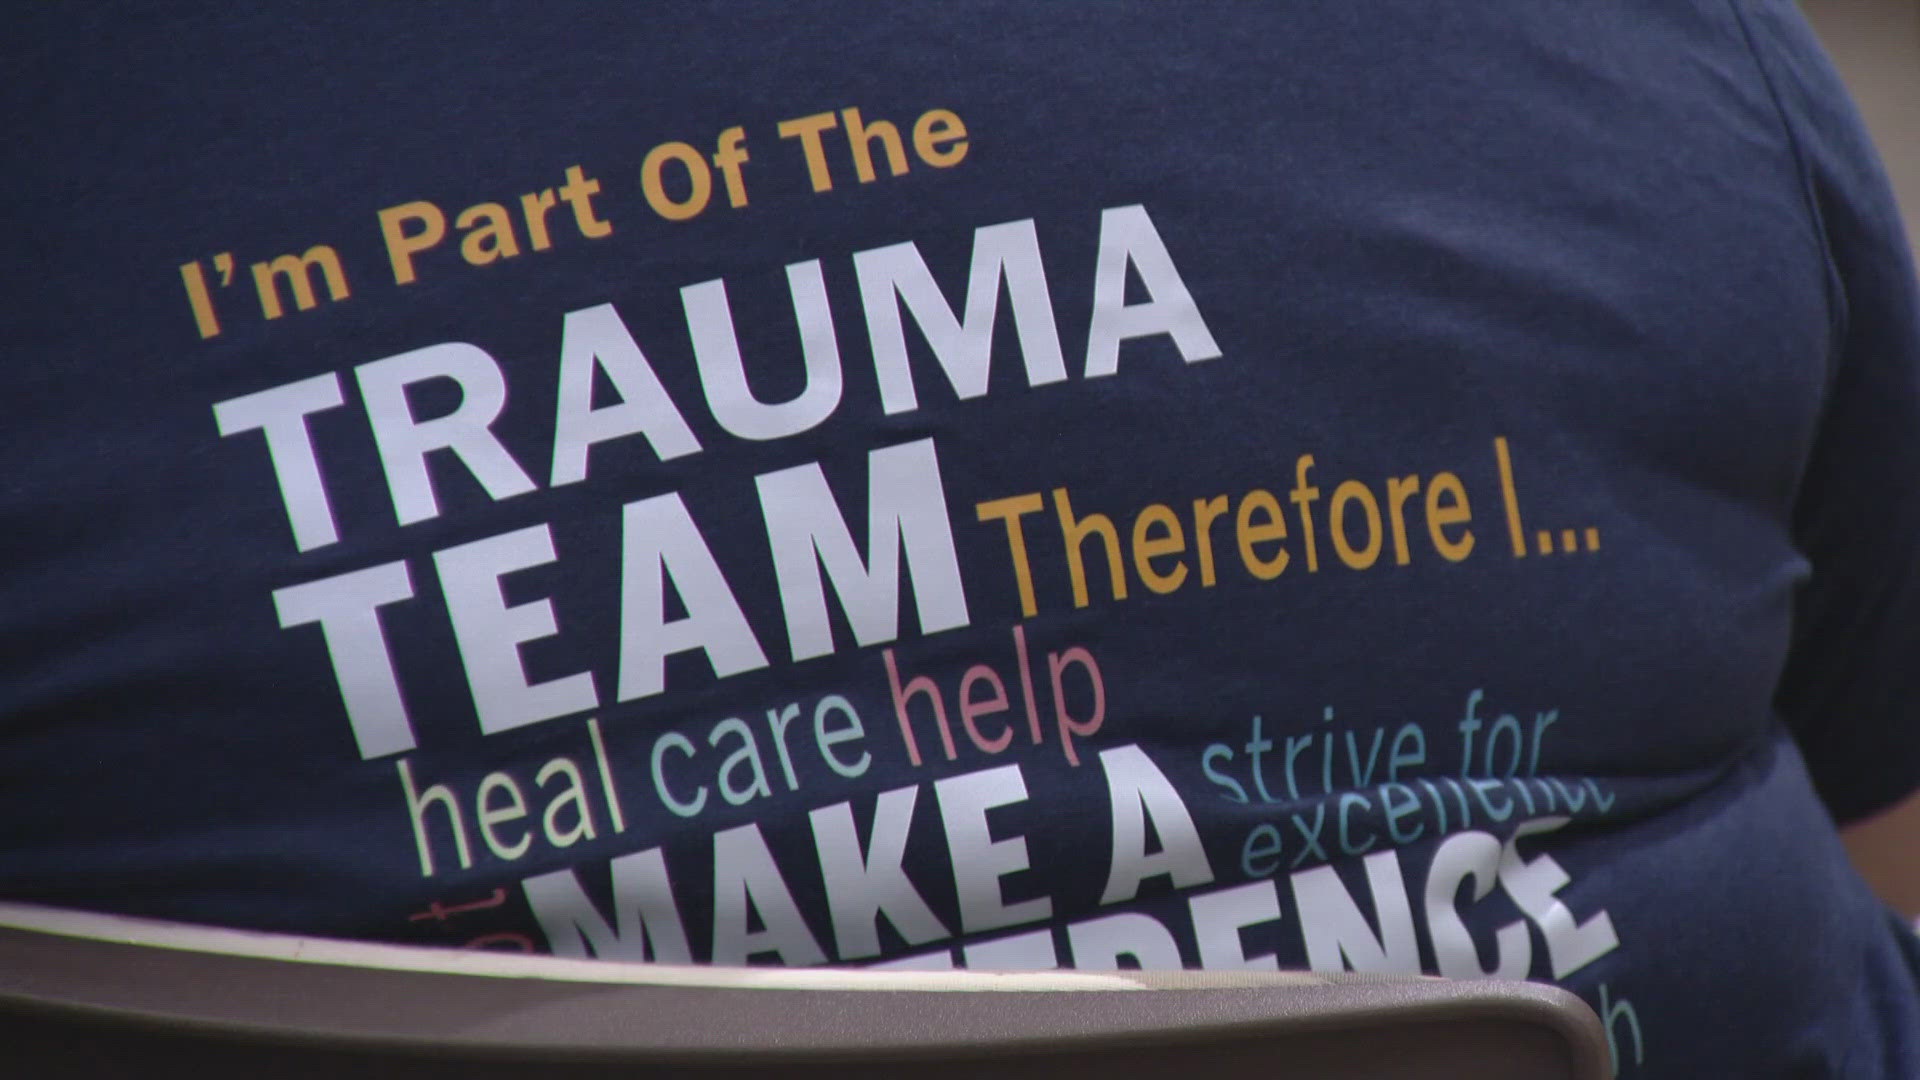 For those who have been through life-threatening situations, Trauma Survivor Day is a reunion.